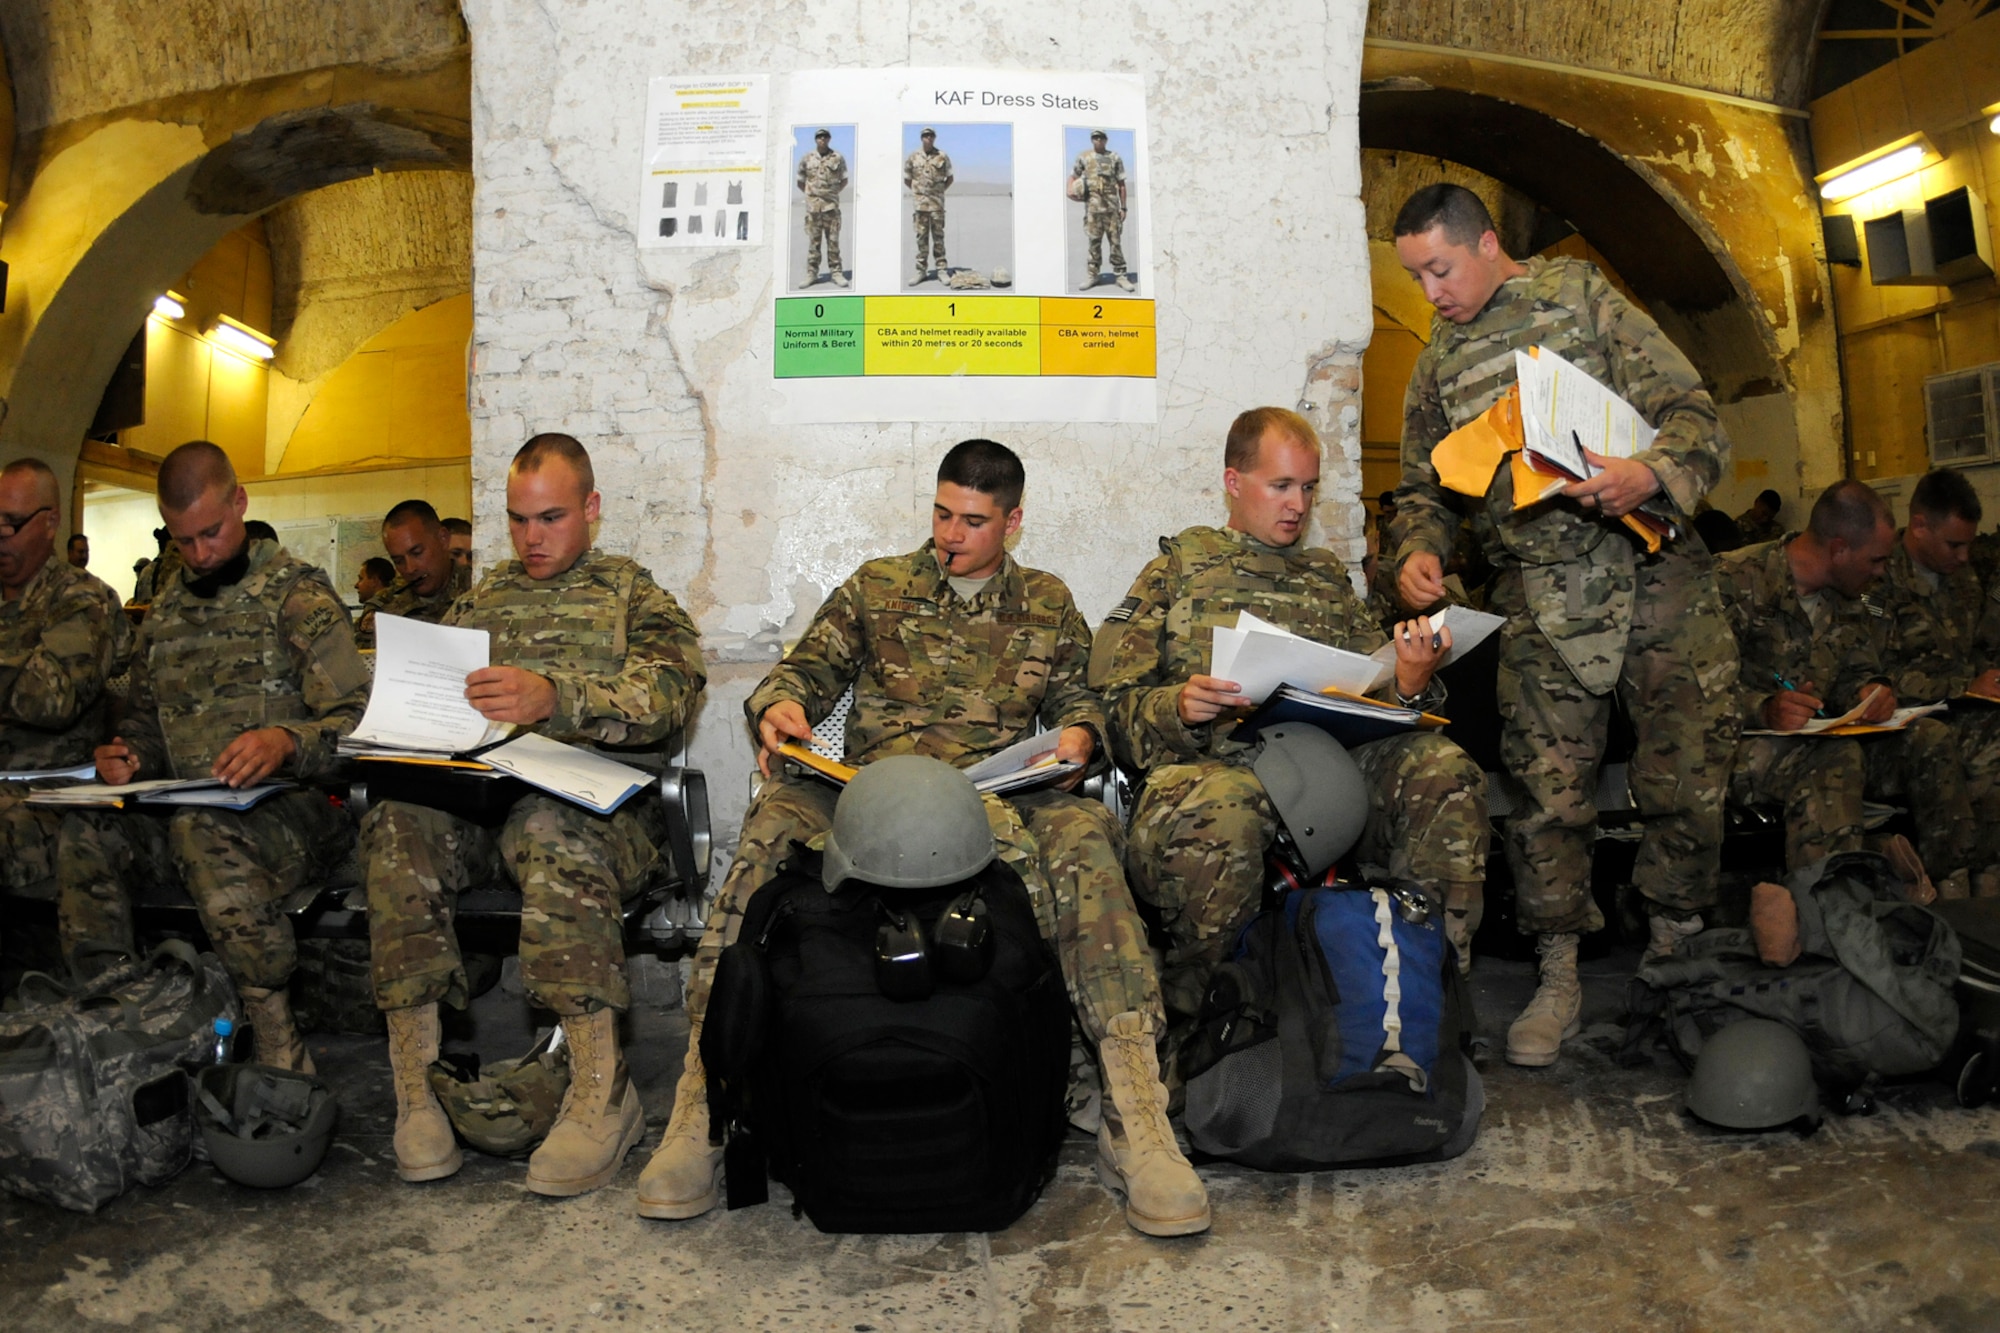 Airmen from the Minnesota Air National Guard begin their in-processing paperwork at the PAX terminal at Kandahar Airfield, Afghanistan, Aug. 10, 2012. Personnel are deployed from the Minnesota Air National Guard's 148th Fighter Wing in support of Operation Enduring Freedom. Bull Dog F-16’s, pilots, and support personnel began their Air Expeditionary Force deployment in mid-August to take over flying missions for the air tasking order and provide close air support for troops on the ground in Afghanistan. (Air Force photo by Tech. Sgt. Stephen Hudson, 169th Fighter Wing/Public Affairs.)